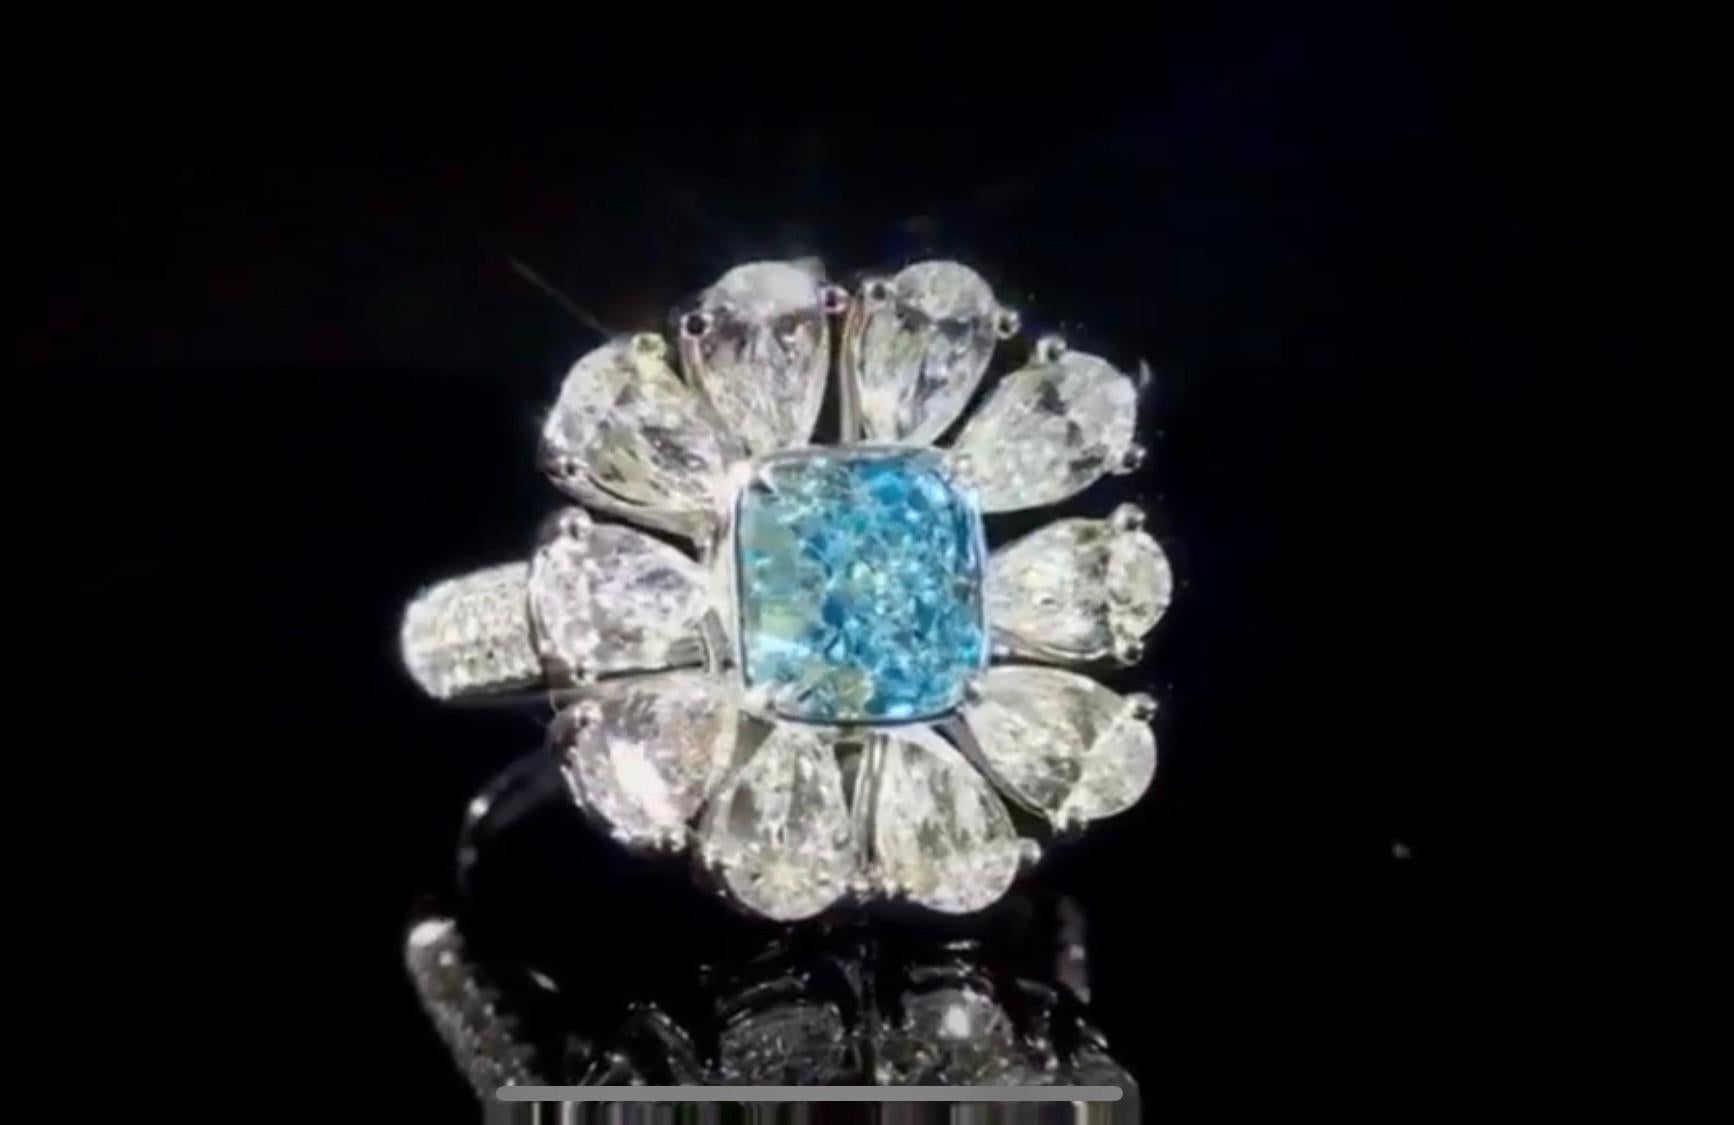 From the Emilio Jewelry Museum Vault, Showcasing a magnificent investment grade 1.00 carat Gia certified natural fancy light g. blue center stone. With Emilio's expertise after setting the center faces up with a visual of fancy intense blue! Natural